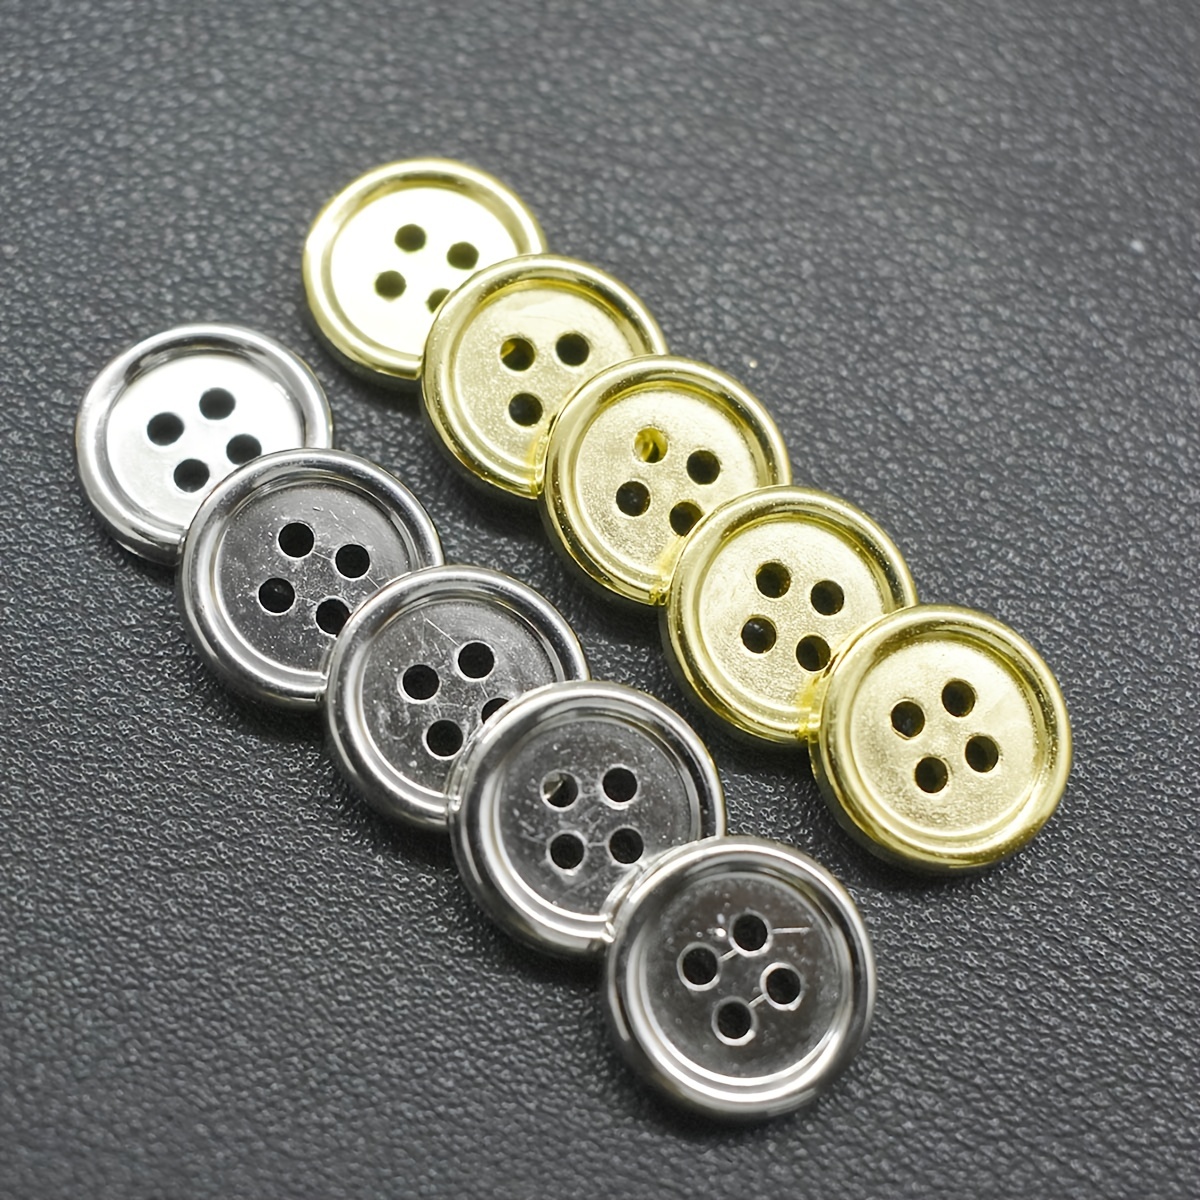 10 Pcs Alloy Rhinestone Pearl Buttons for Sewing Metal Trench Crafts Button  for DIY Bag Suits Coat Uniform Jacket Single Hole